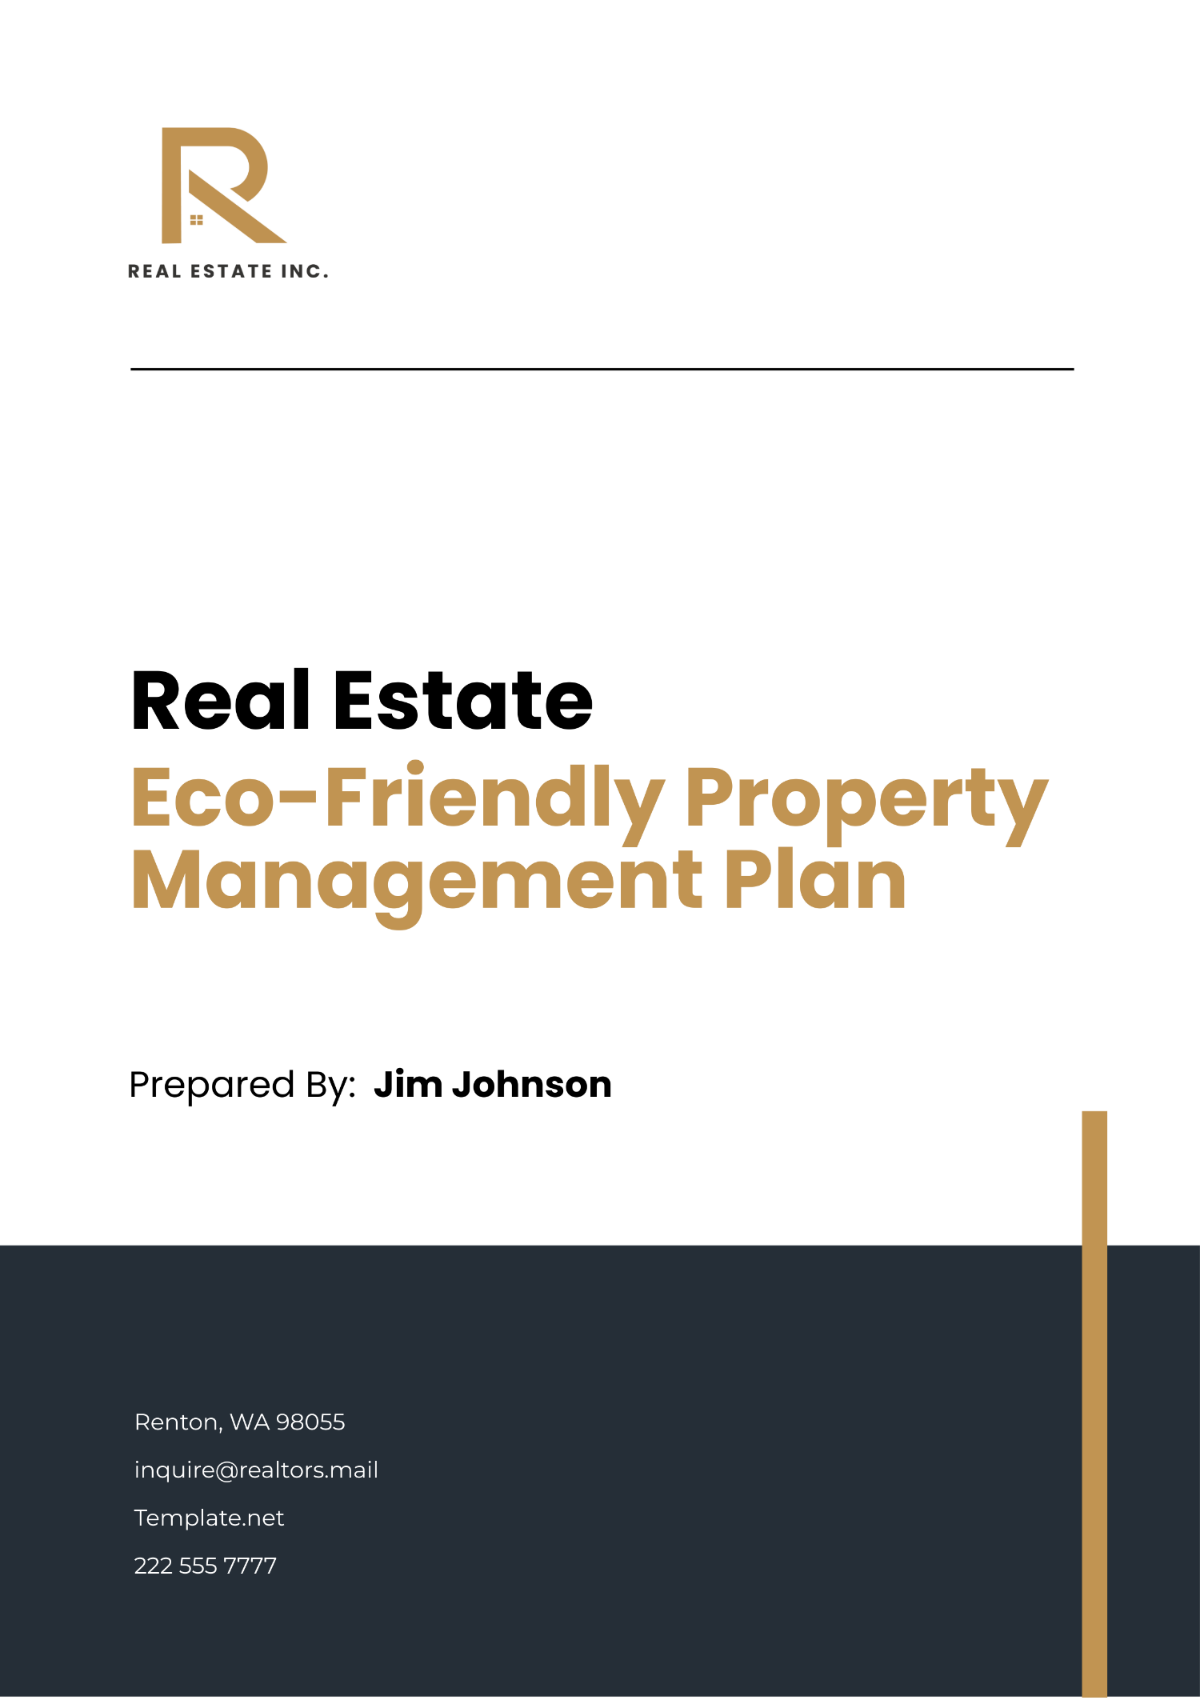 Real Estate Eco-Friendly Property Management Plan Template